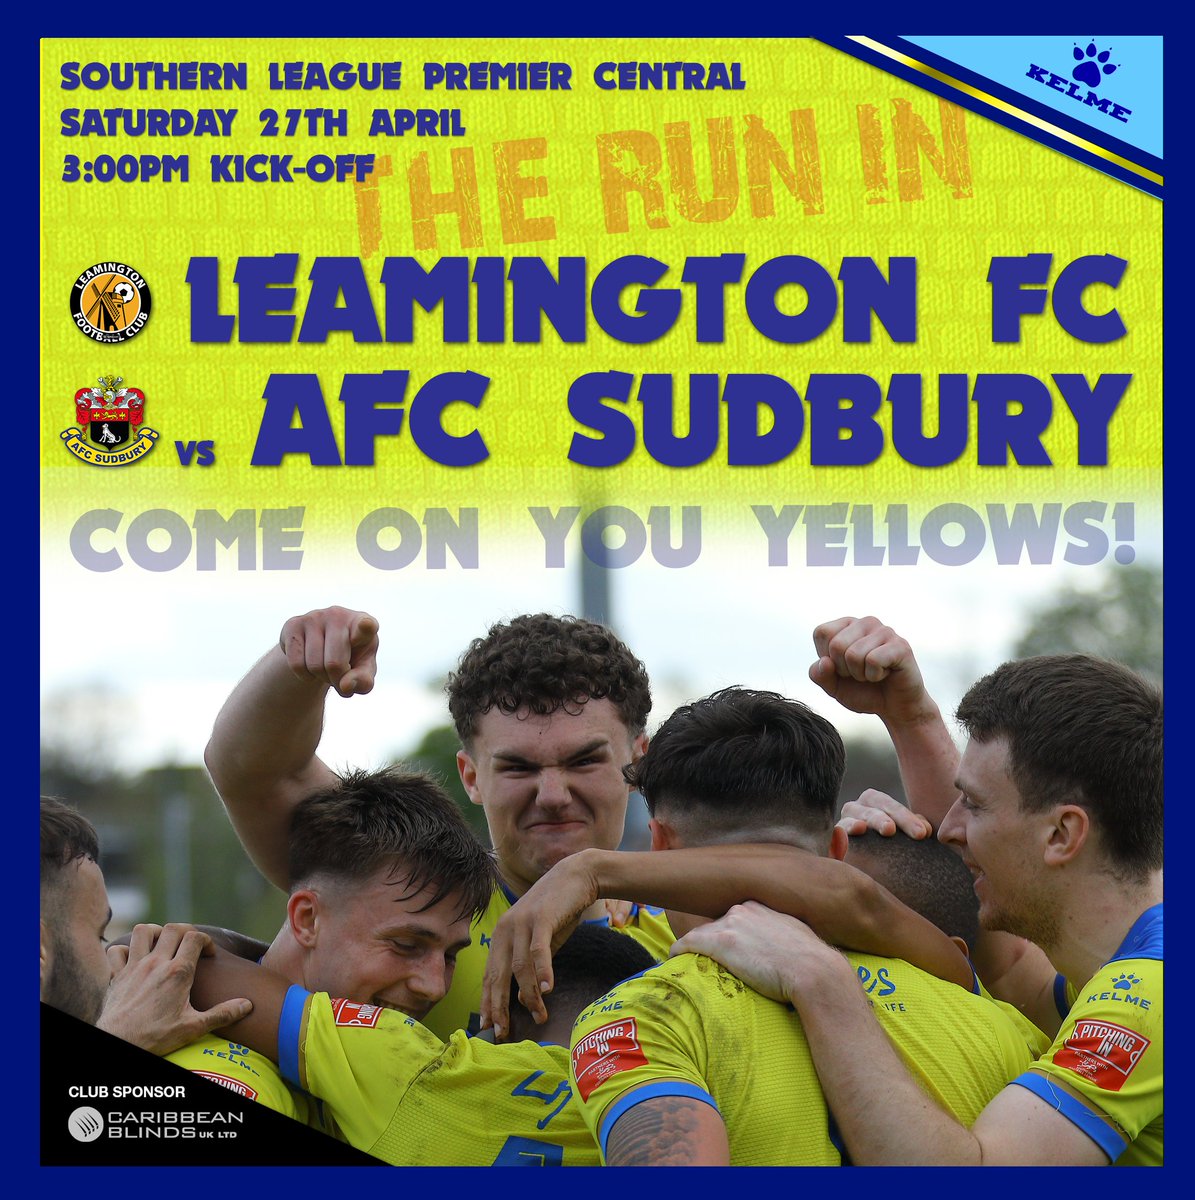 Matchday anyone?

@SouthernLeague1 
@LeamingtonFC vs AFC Sudbury 
3pm KO
Fancy Dress obligatory 
It's going to be epic